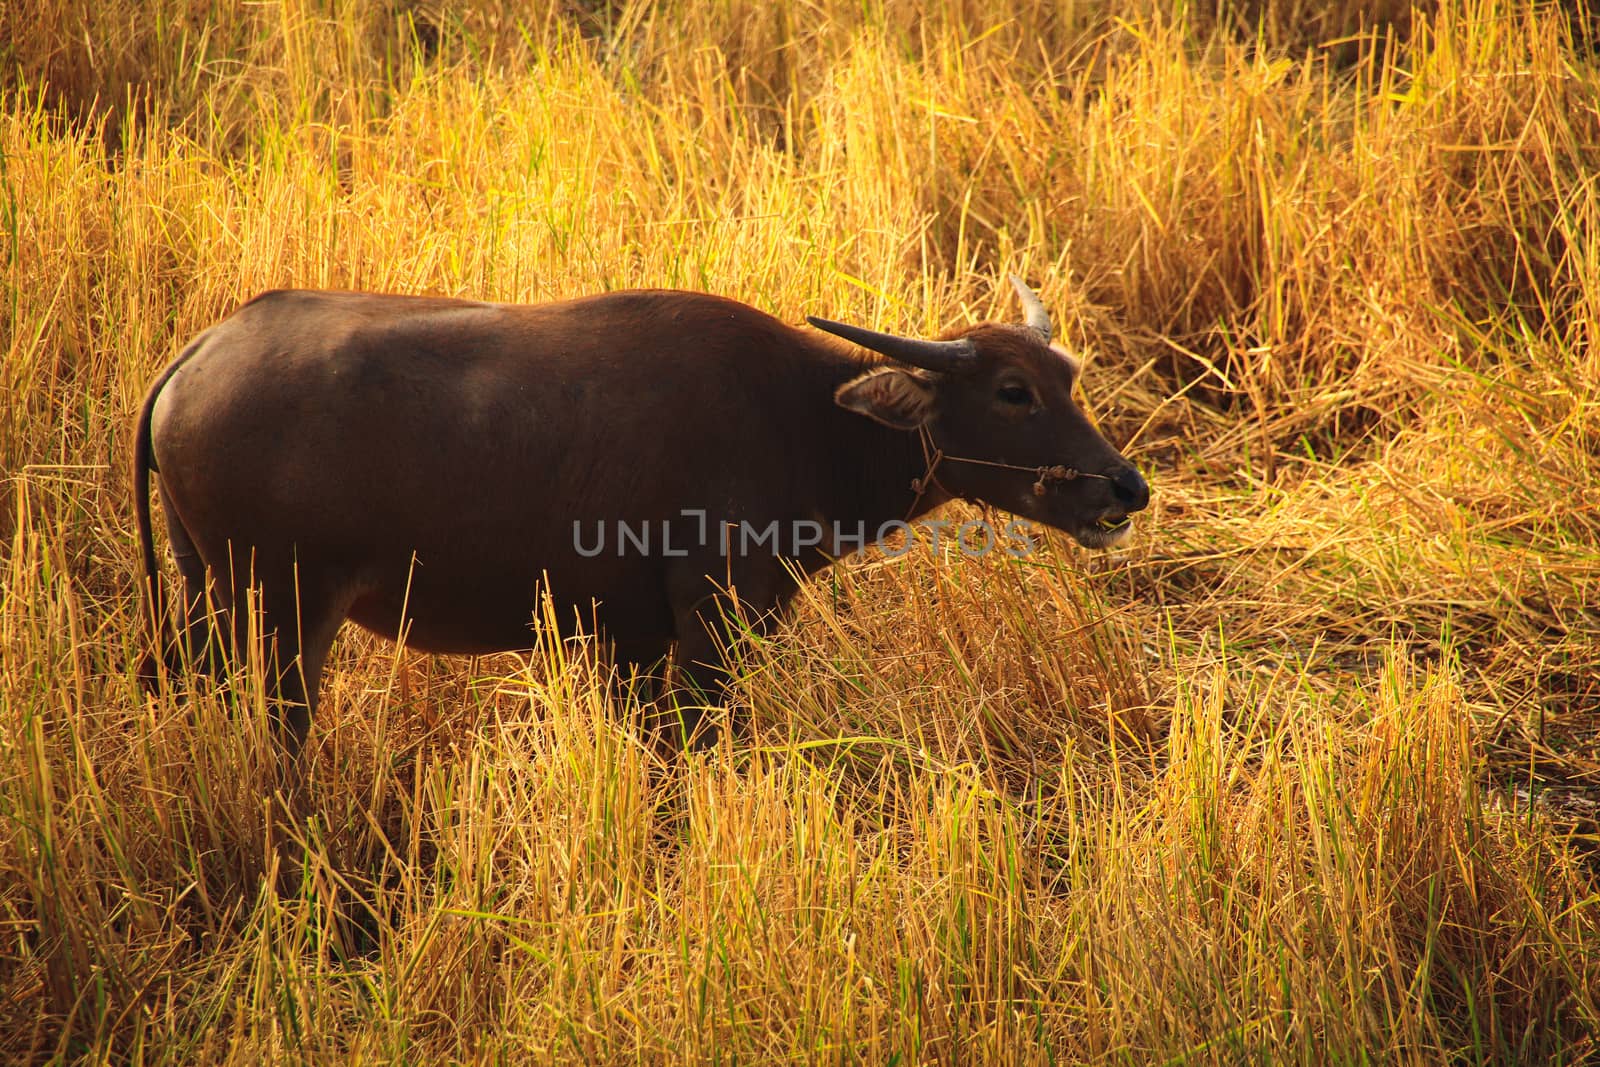 A water buffalo grazing on dried rice fields showing the rural life in Kampot, Cambodia